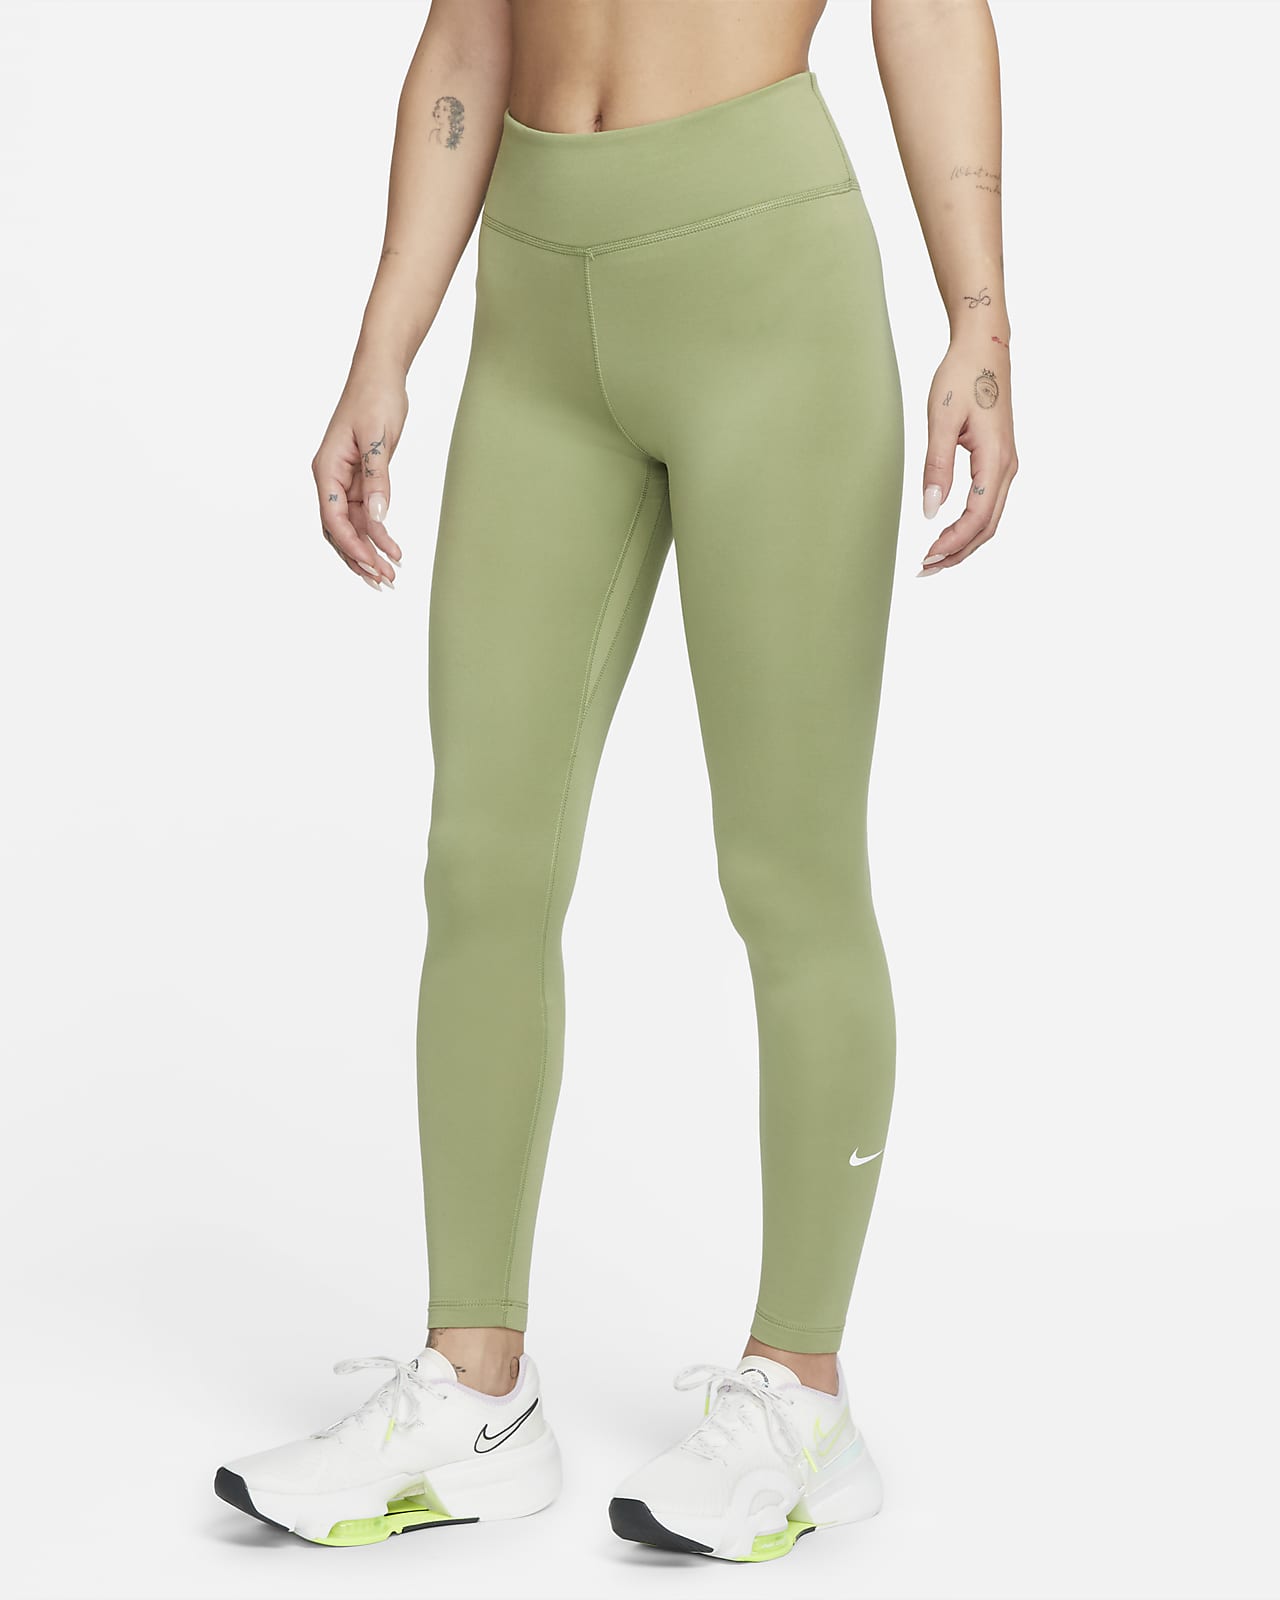 Therma-FIT One Women's Mid-Rise Leggings. Nike.com